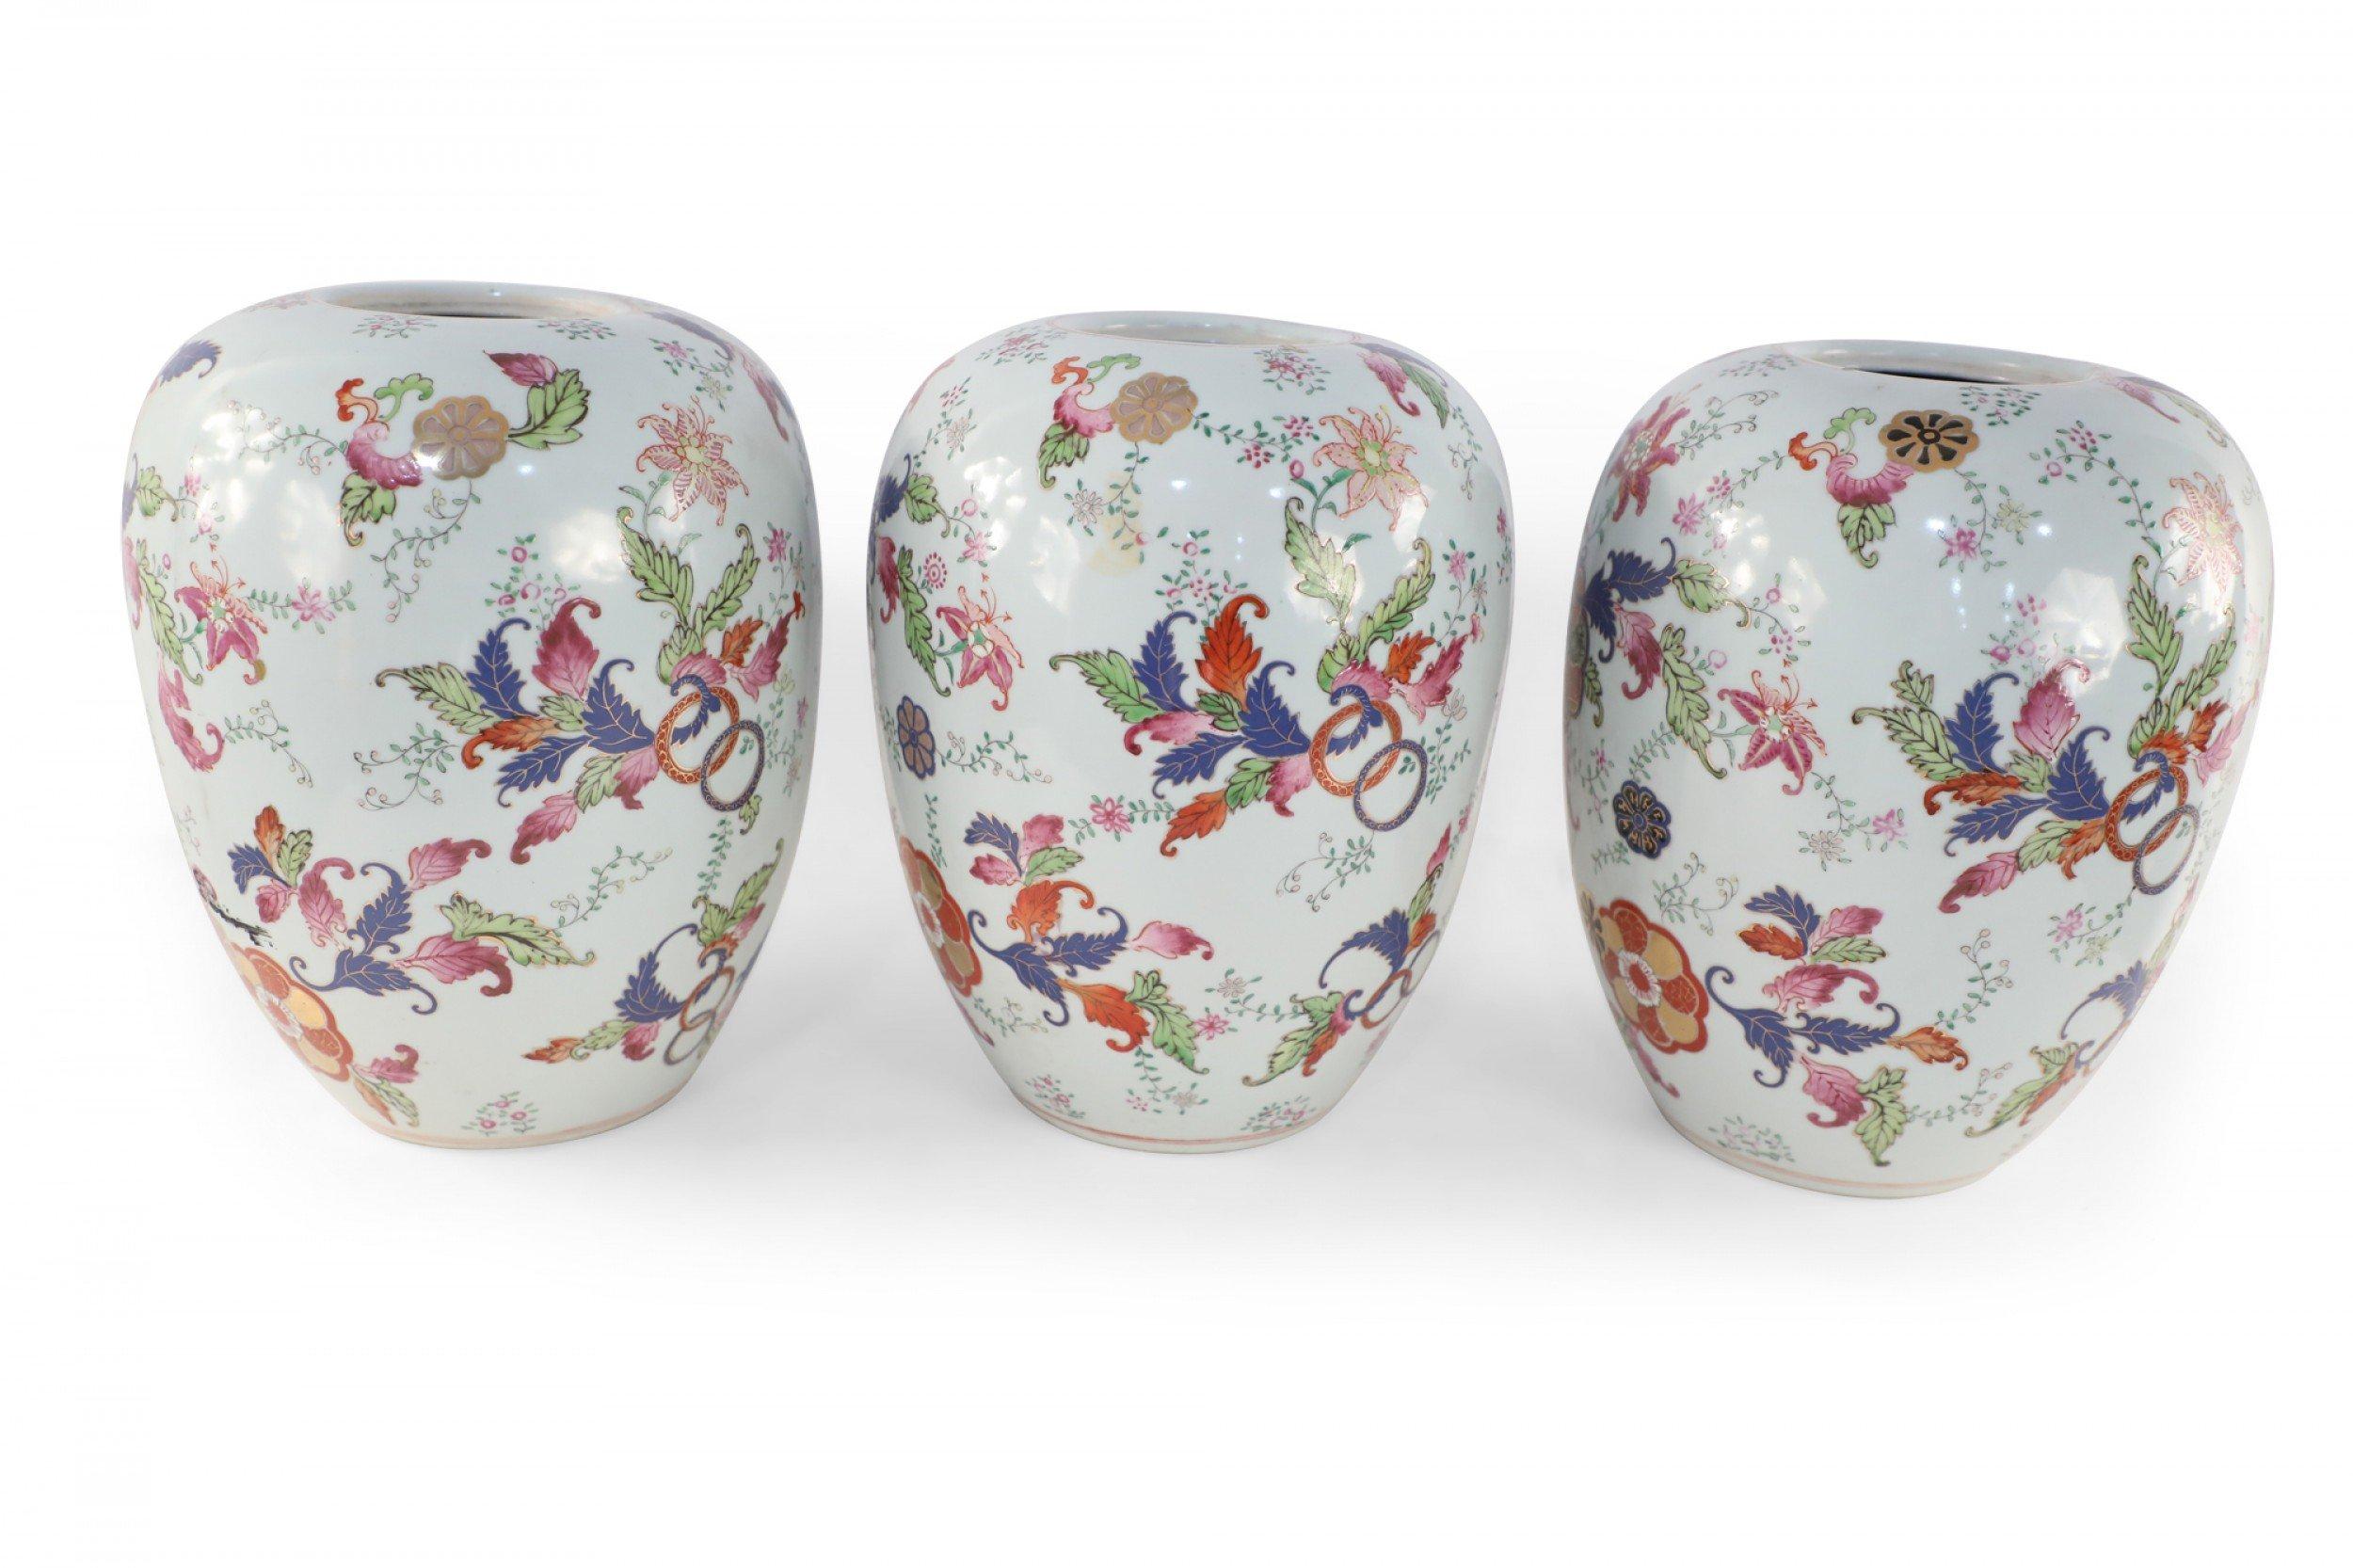 20th Century Chinese White and Floral Pattern Porcelain Jars For Sale